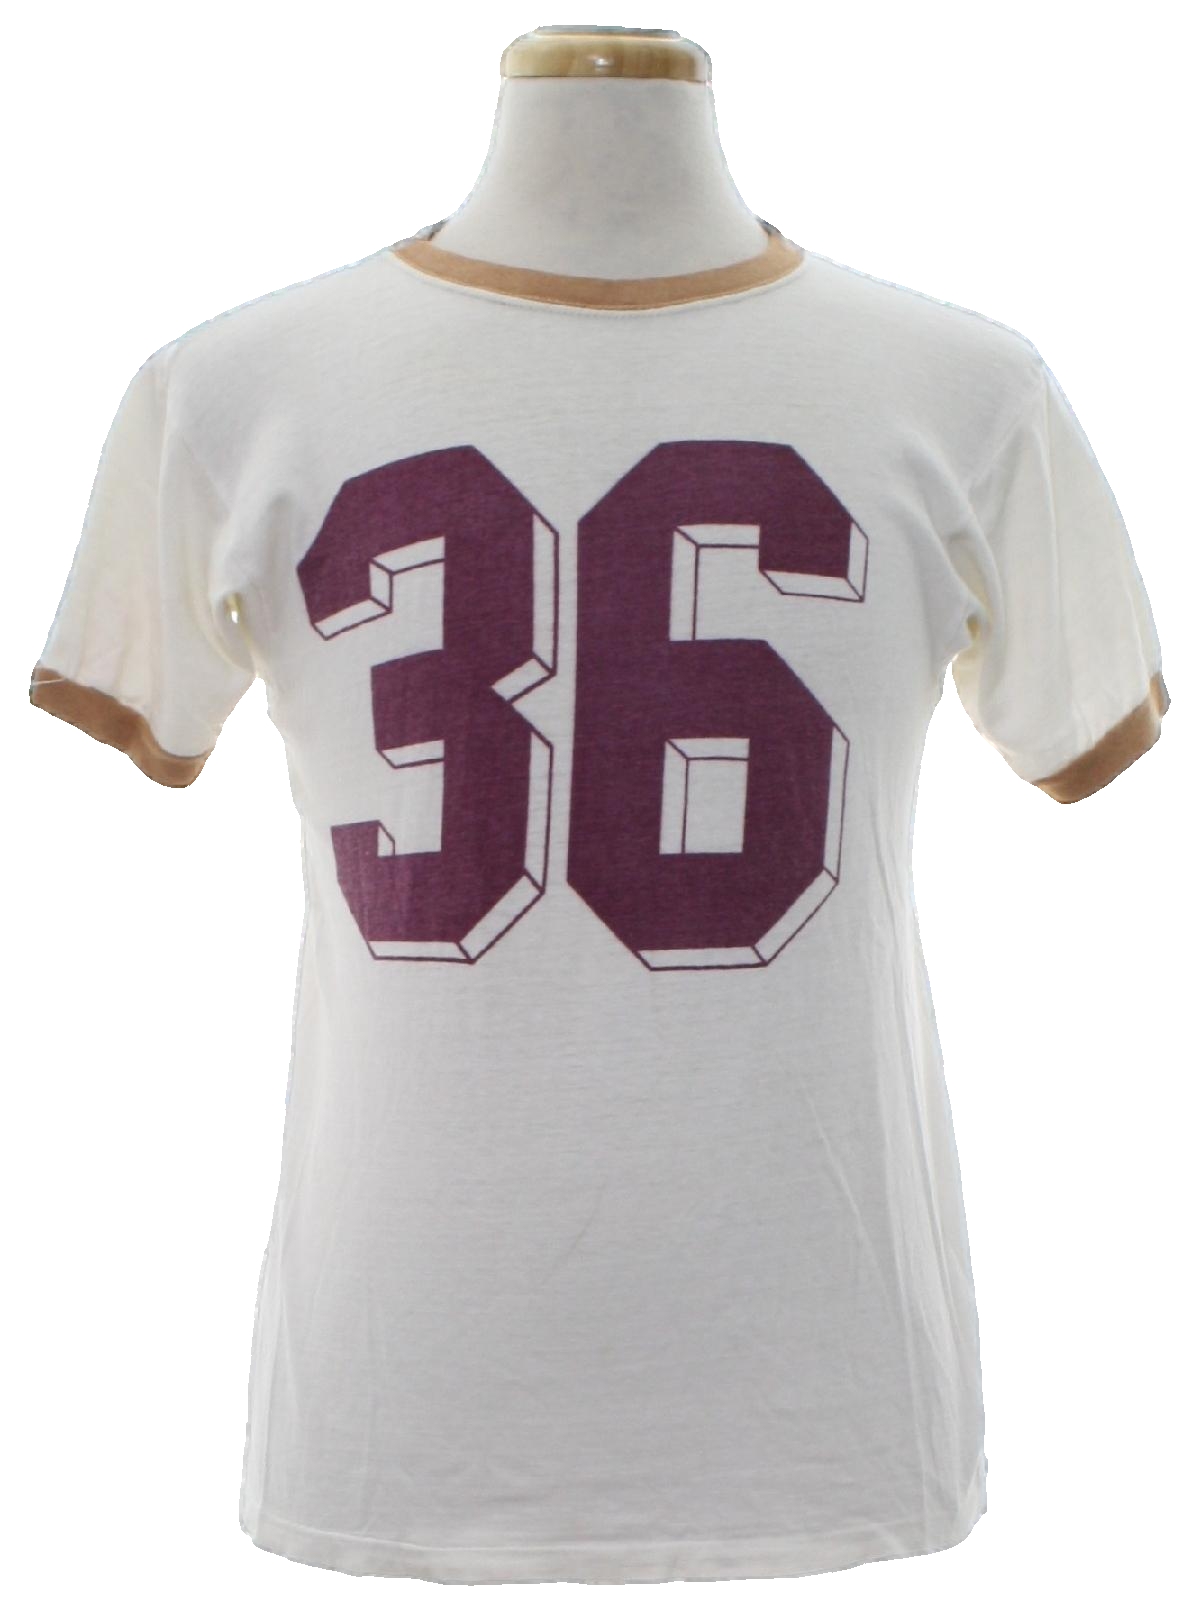 Vintage Sportswear 70's T Shirt: 70s -Sportswear- Unisex white background  cotton polyester blend short sleeve, pullover T-shirt with tan trimmed  round neckline, tan trimmed sleeve cuffs, the number -36- screen printed in